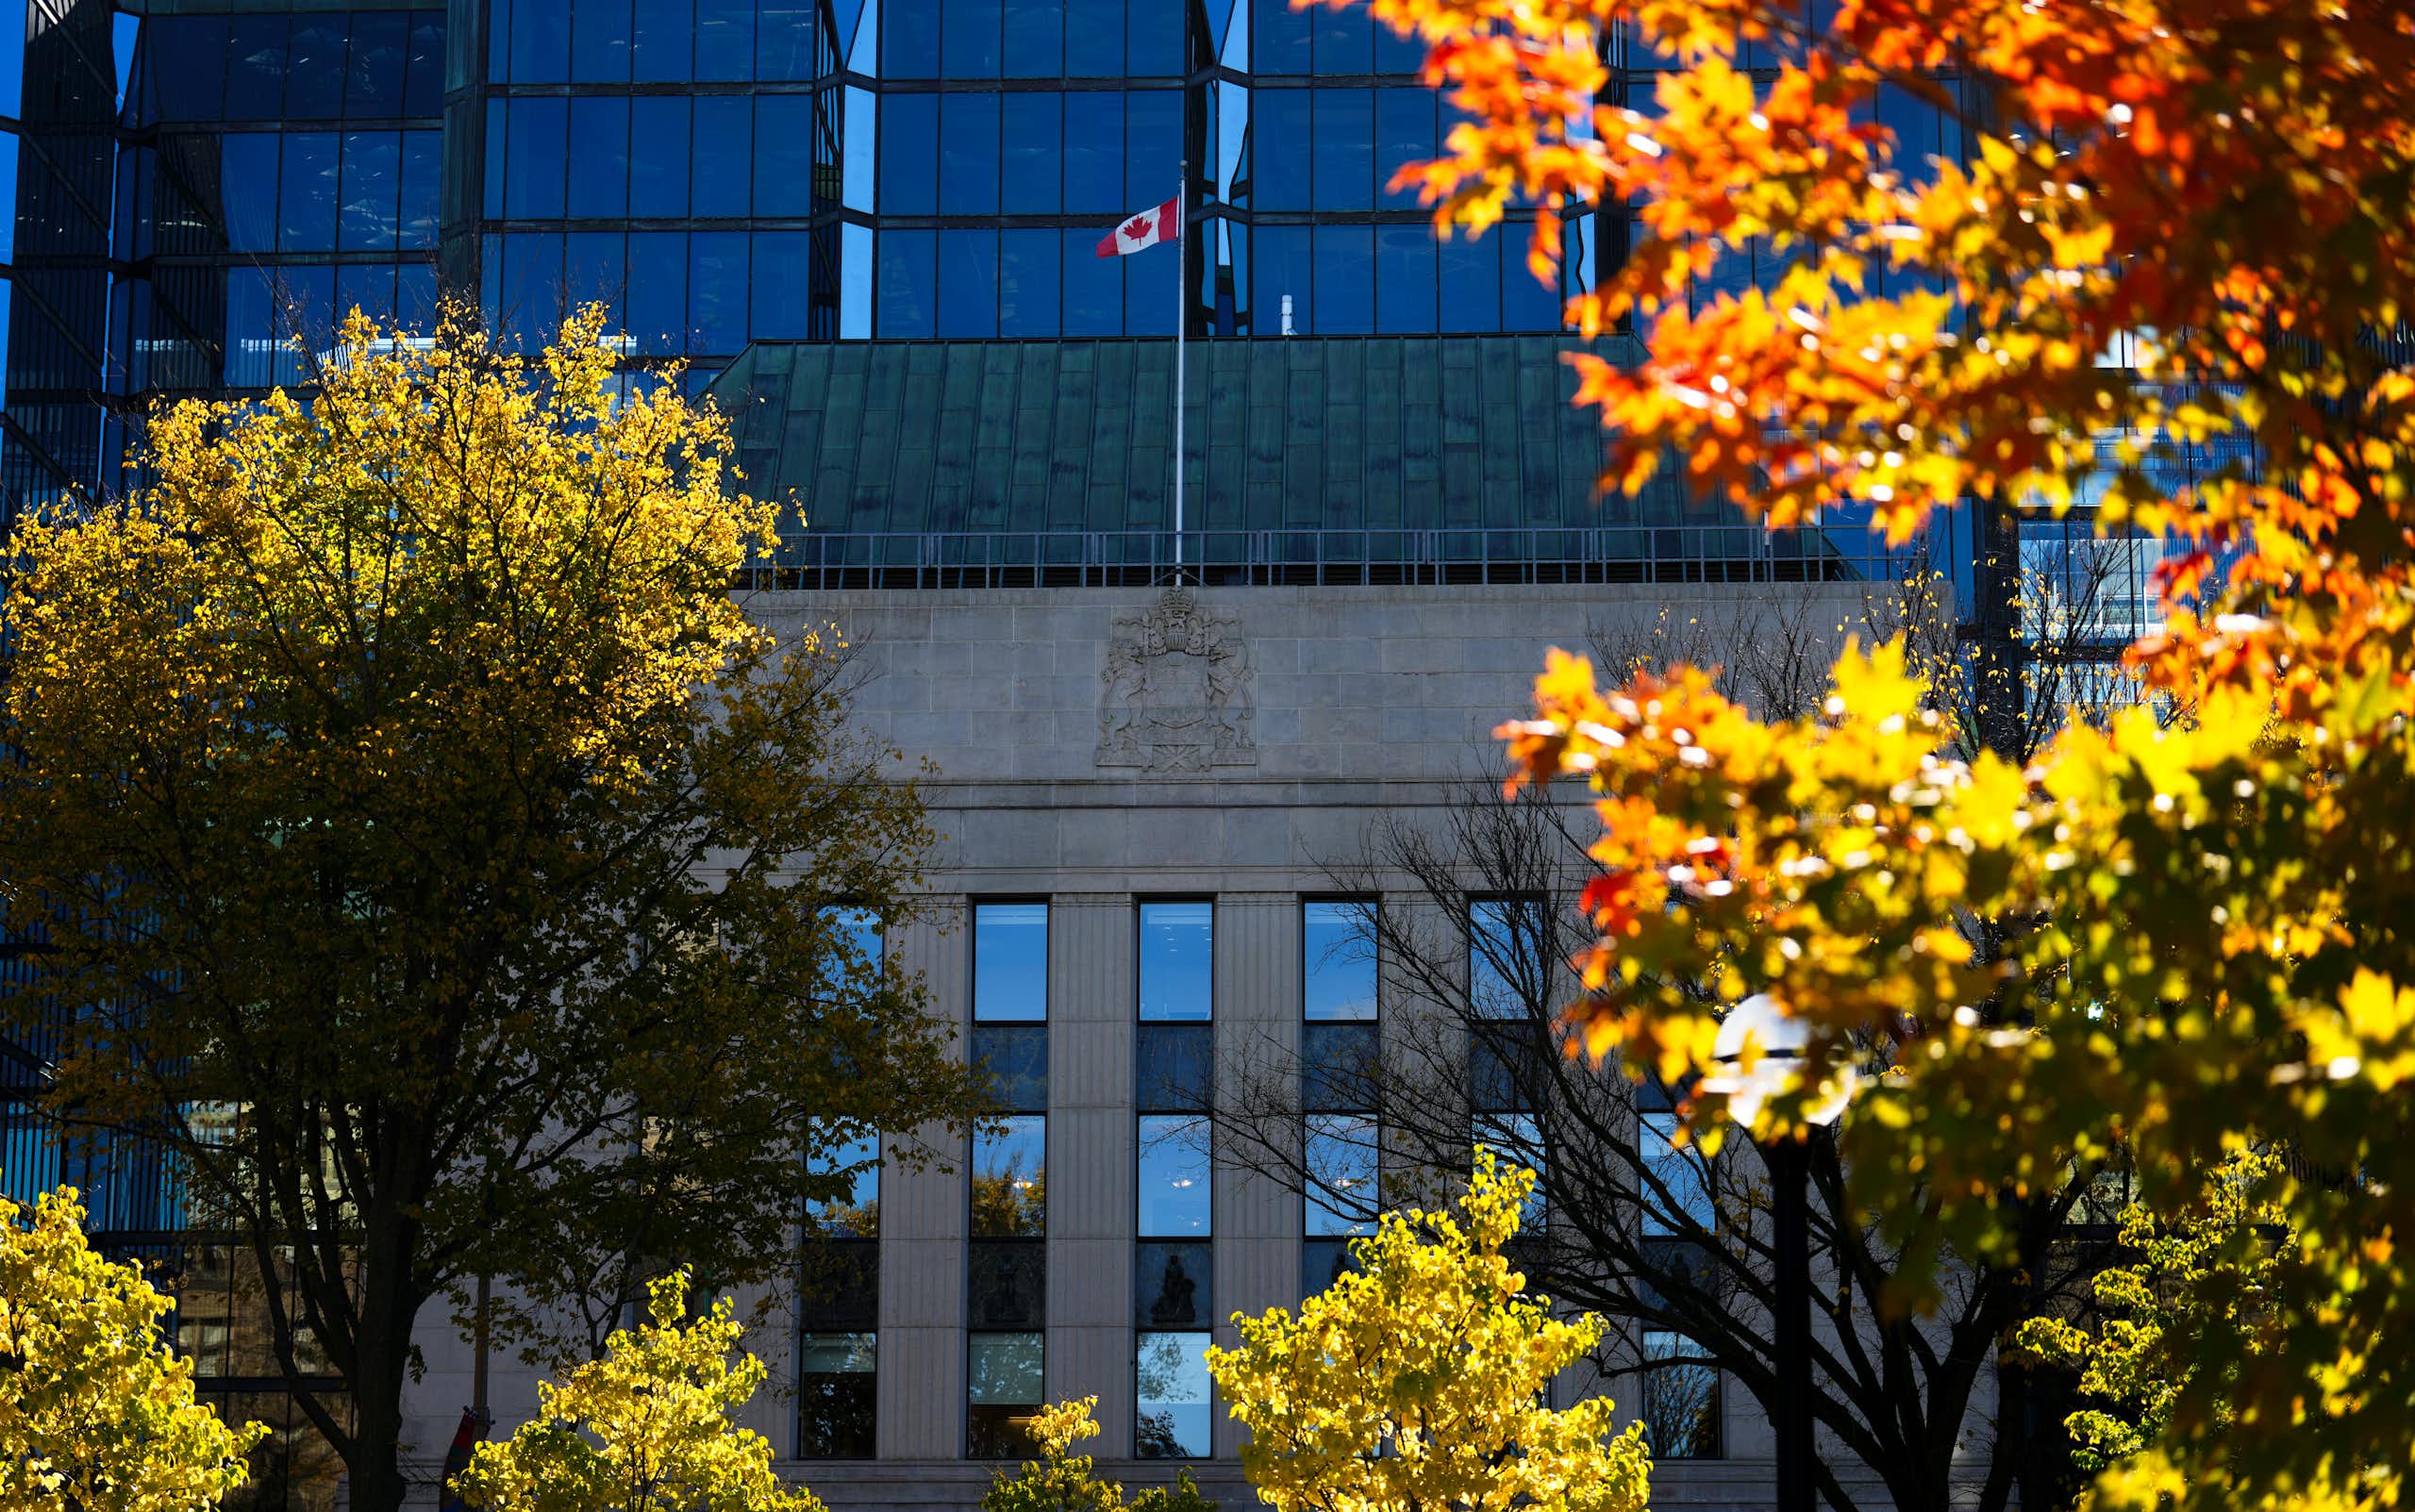 A building with a Canadian flag on the front is framed by deciduous trees with green leaves that are starting to turn orange and red